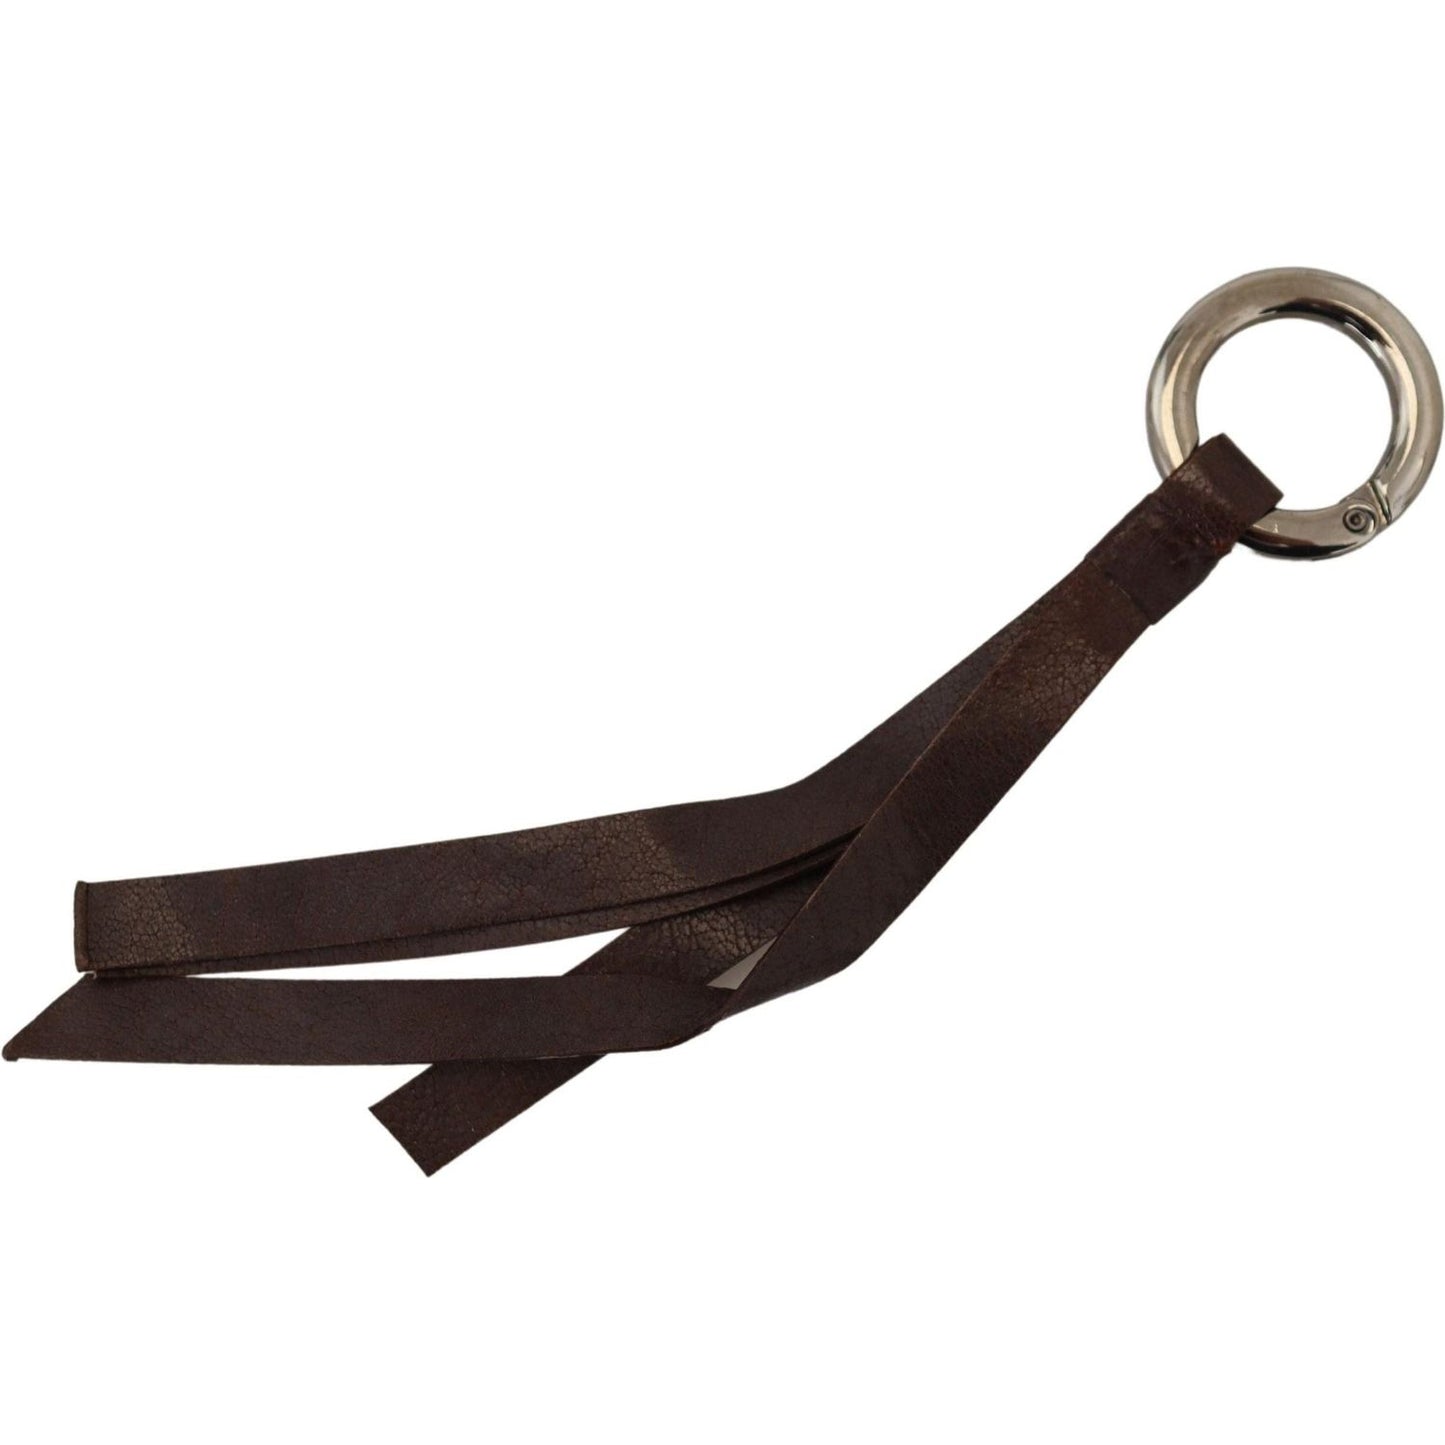 Costume National Chic Brown Leather Keychain with Brass Accents brown-leather-silver-tone-metal-keyring-keychain-1 IMG_6900-1fc4290f-823.jpg